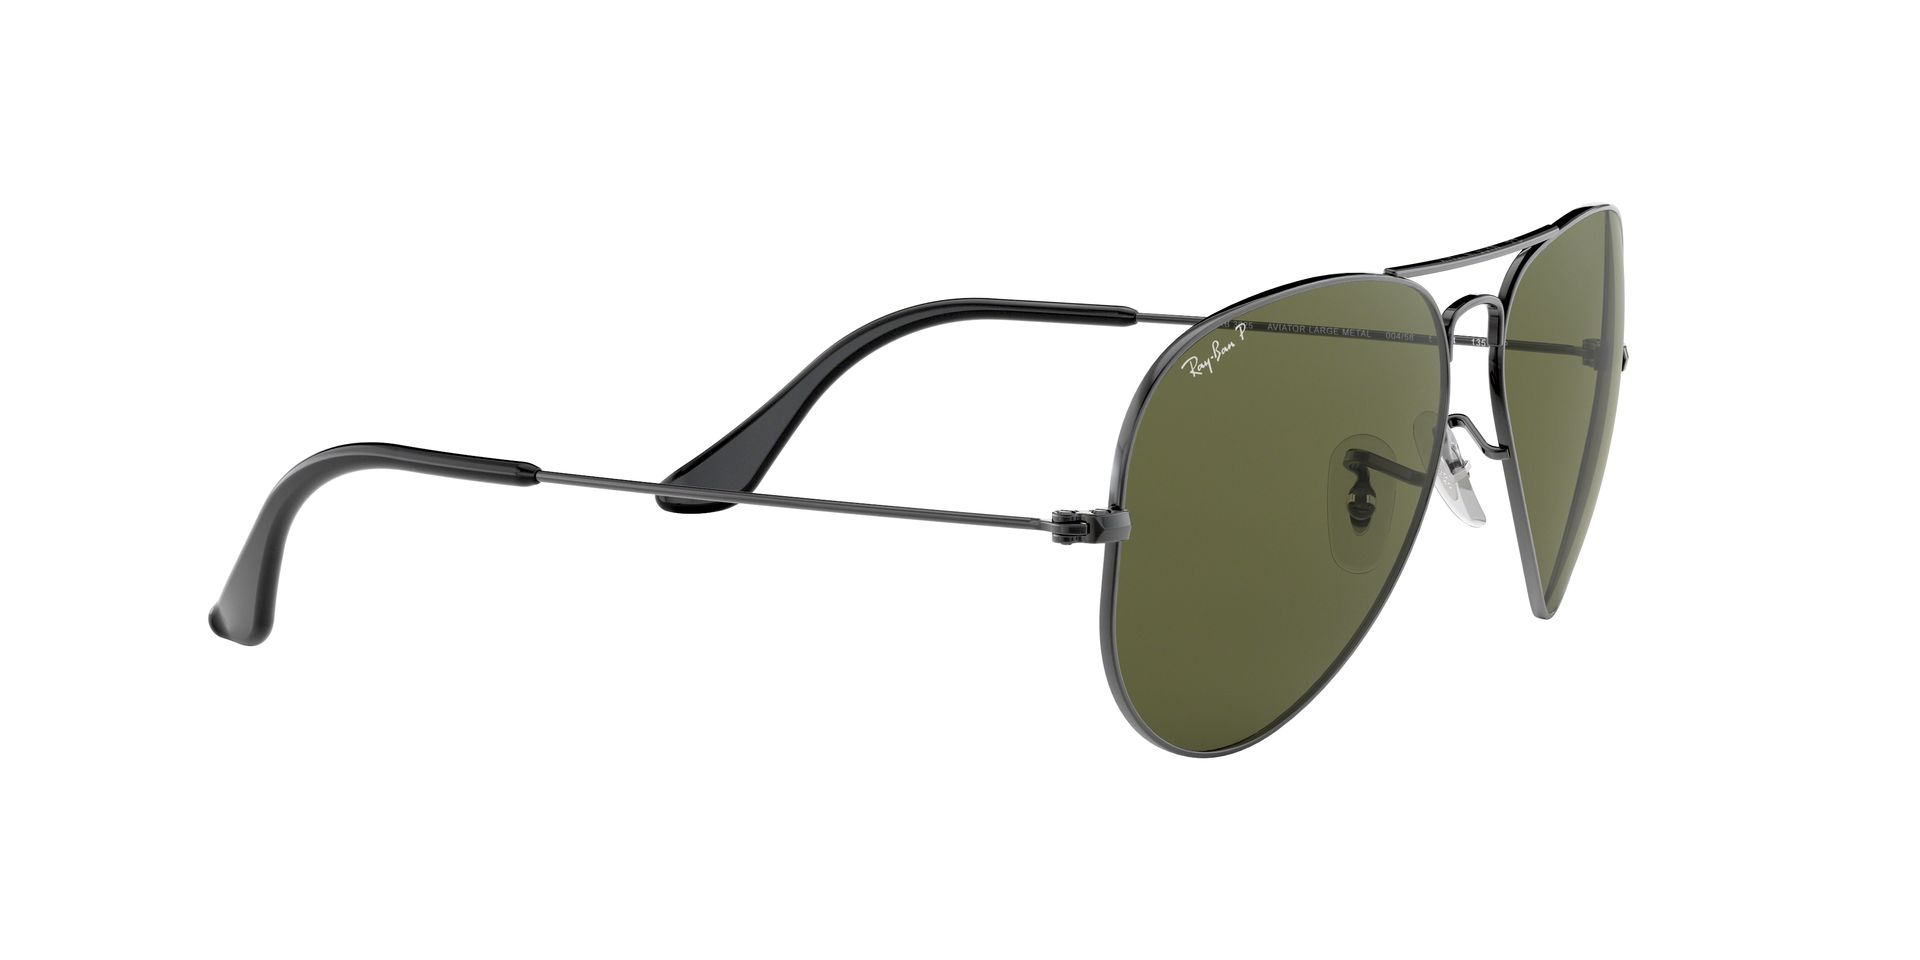 Brillenchic Onlineshop In Berlin Ray Ban Aviator Rb 3025 004 58 Polarized